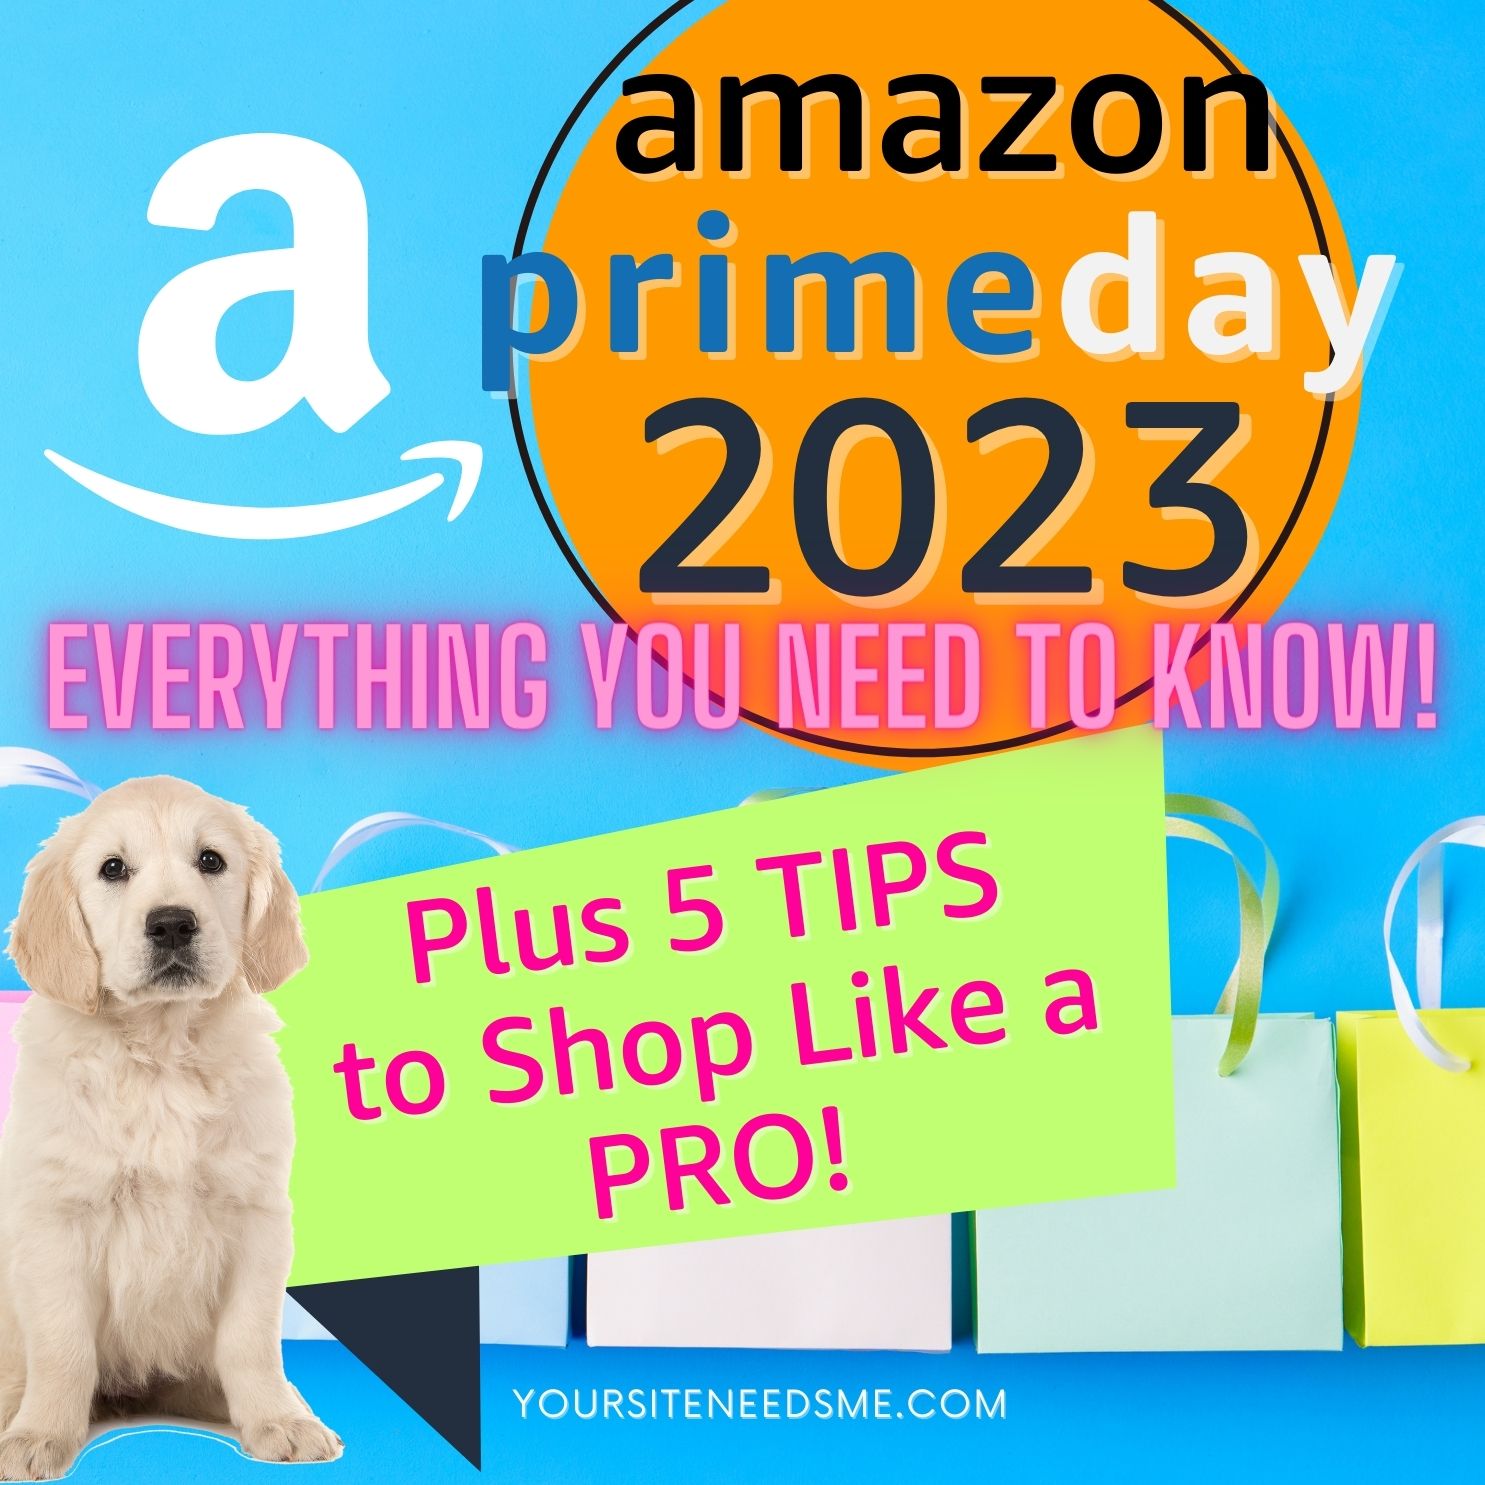 Amazon Prime Day 2023 Everything you need to know